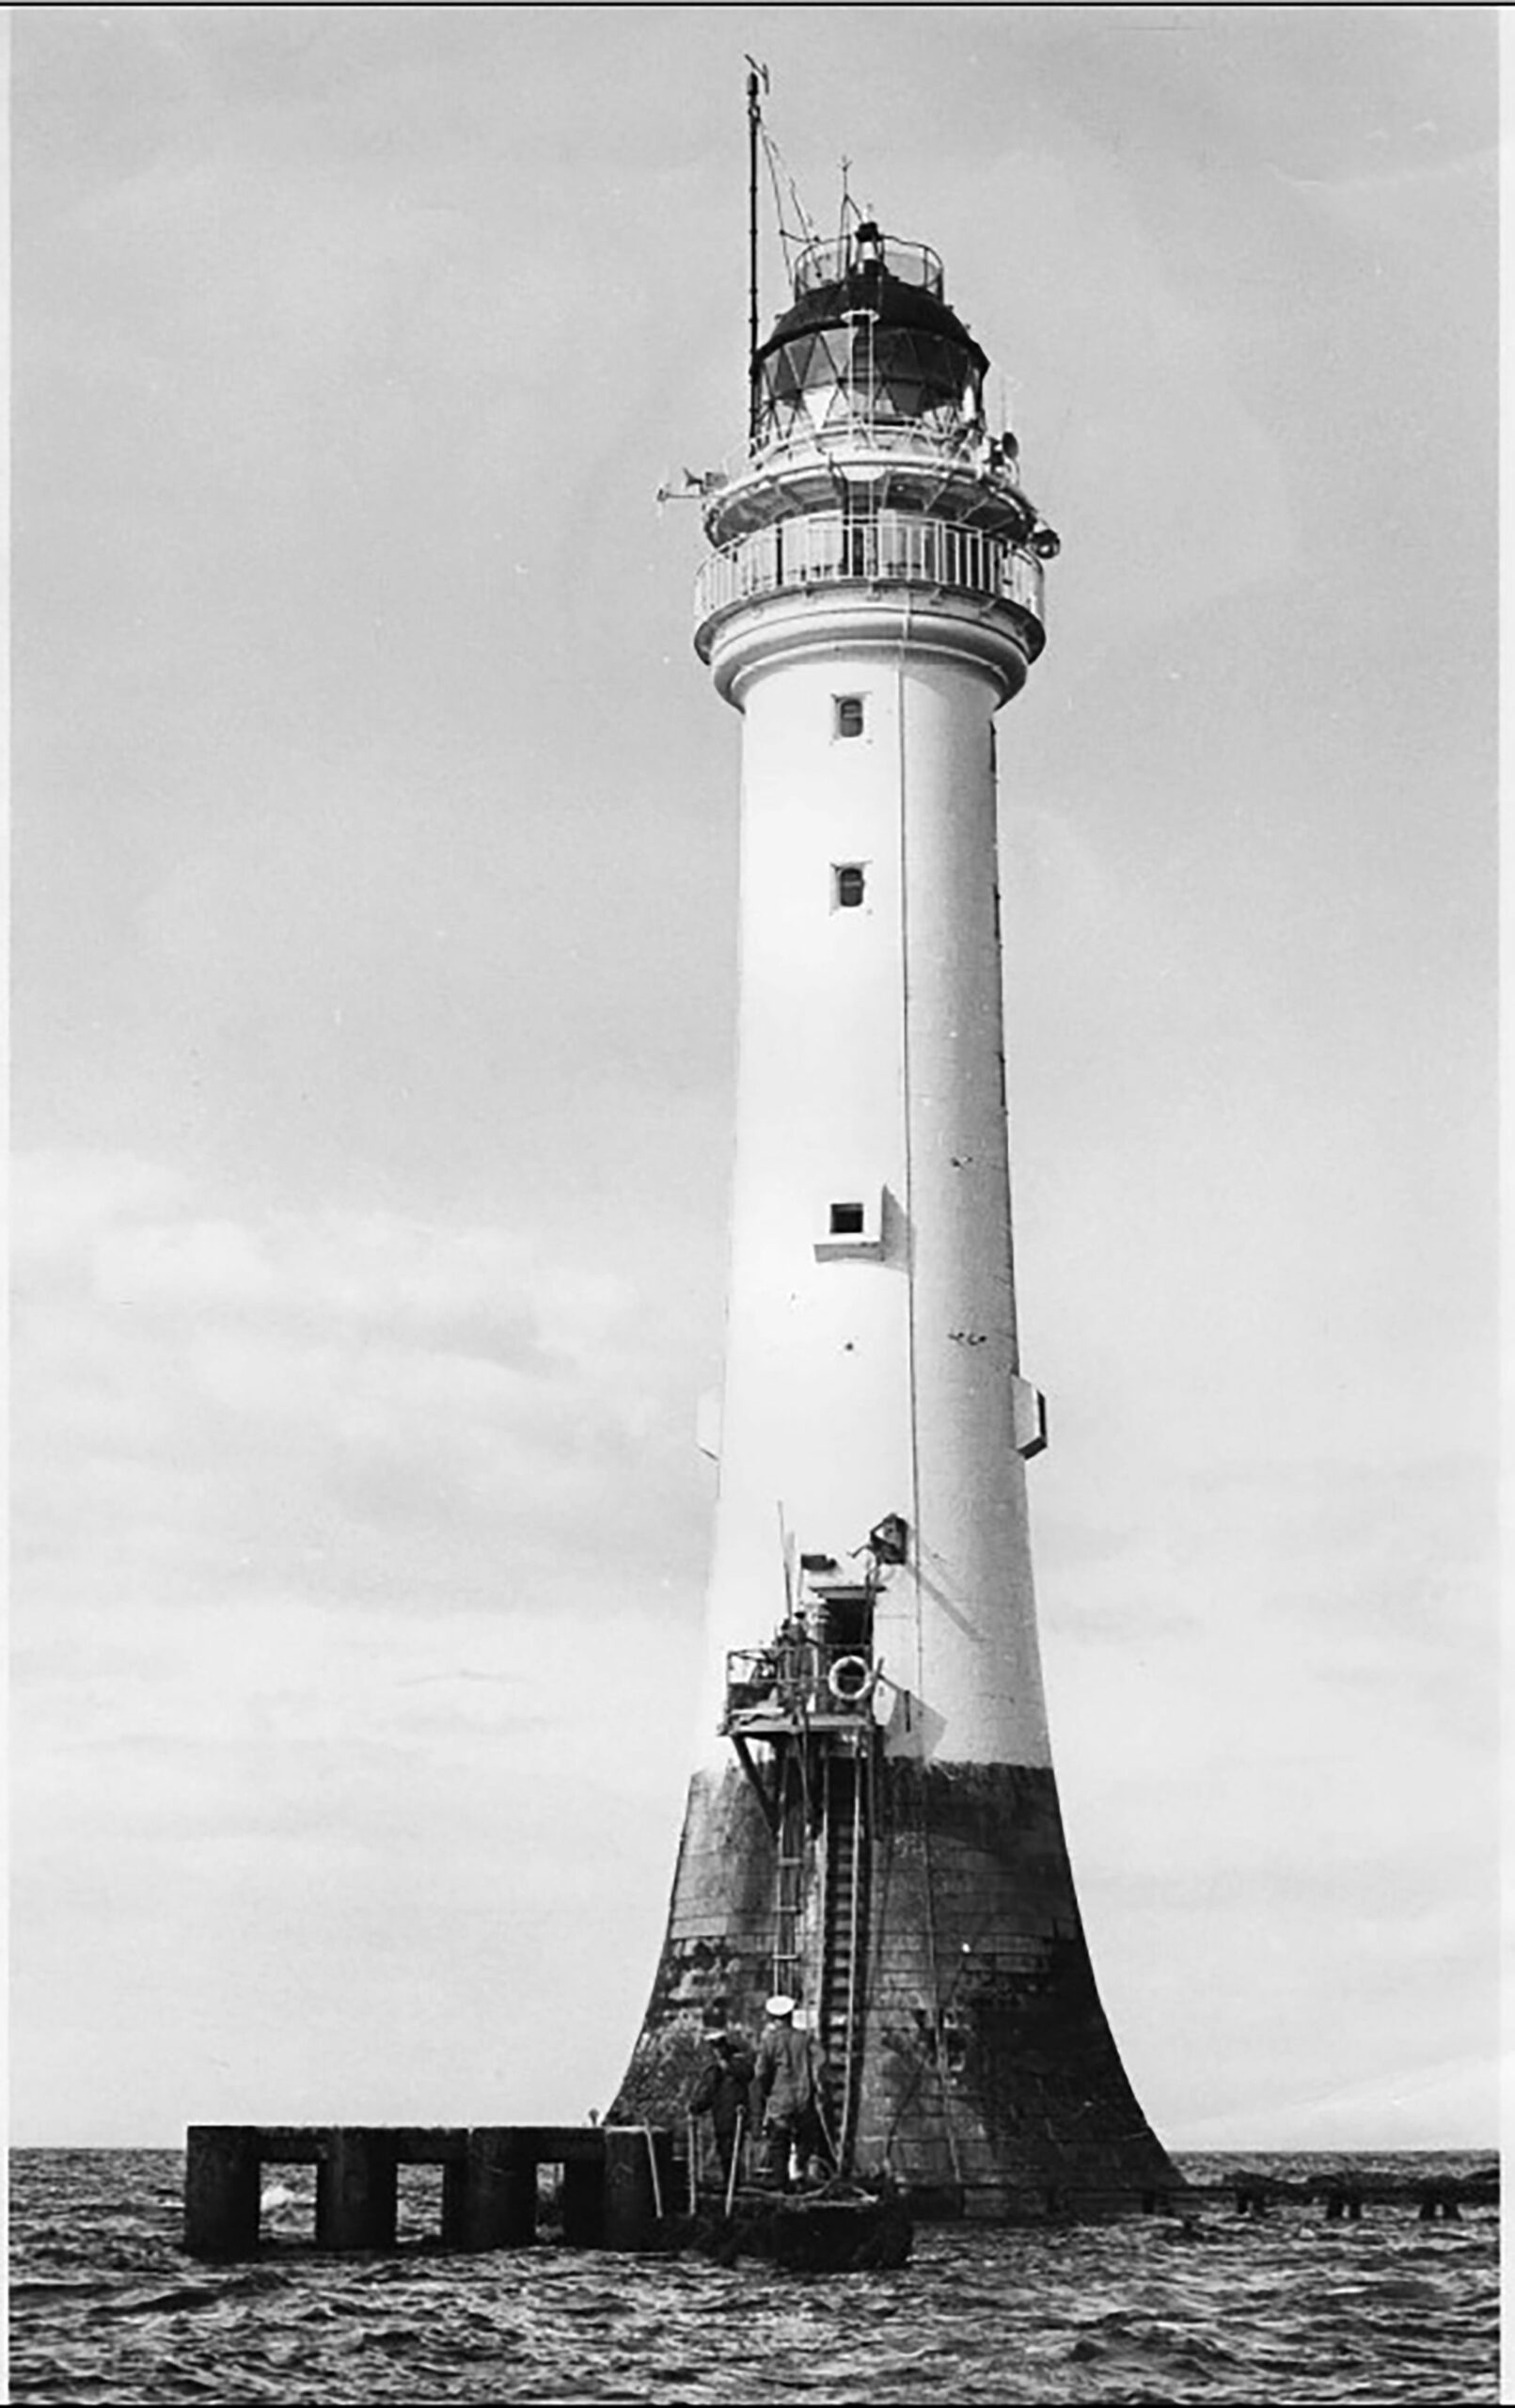 Tayport Heritage Trail - Board 7 - Bell Rock lighthouse circa 1960s